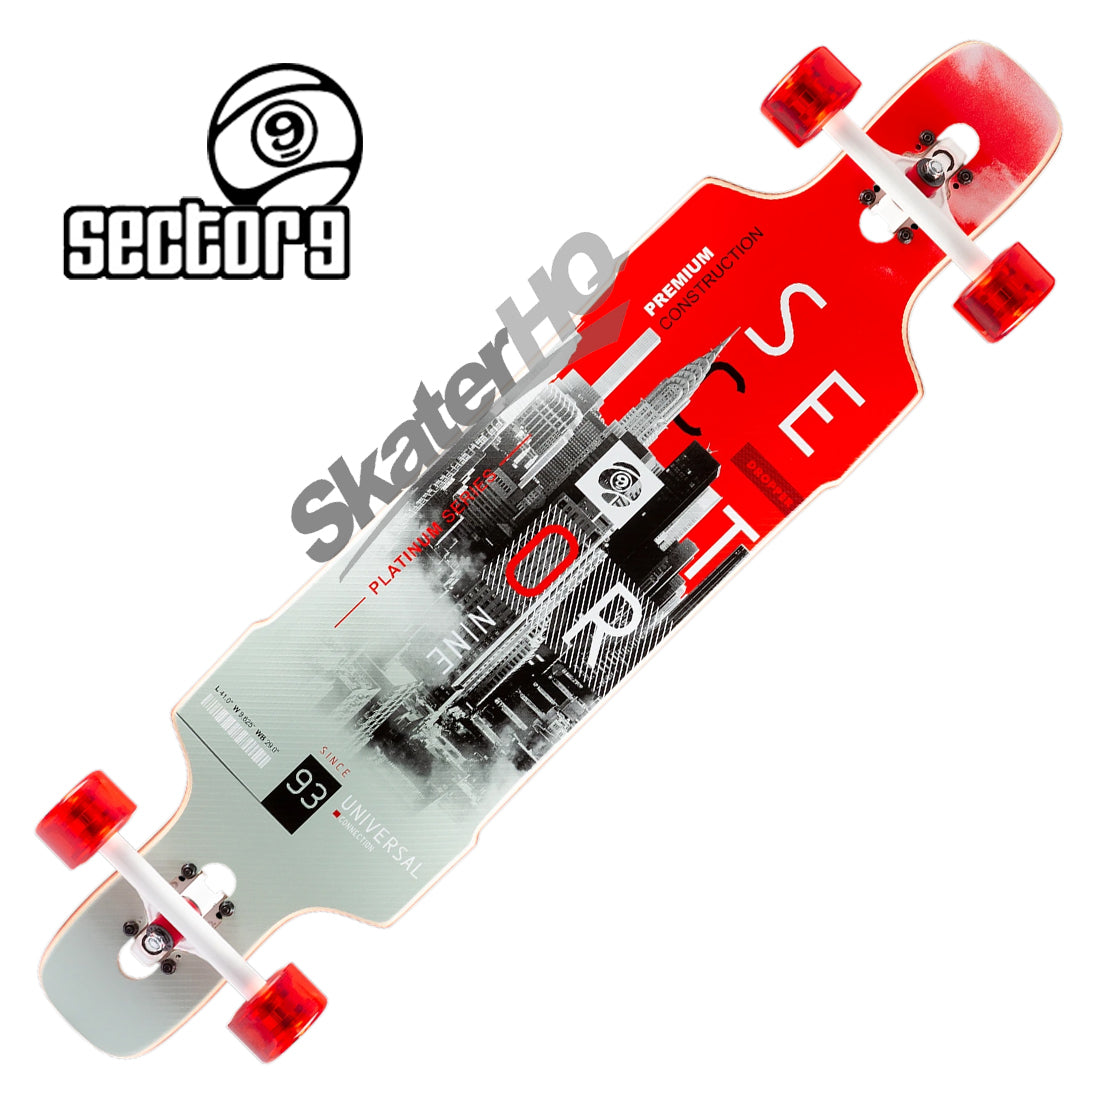 Sector 9 Dropper Downtown 41 Complete - Red Skateboard Completes Longboards